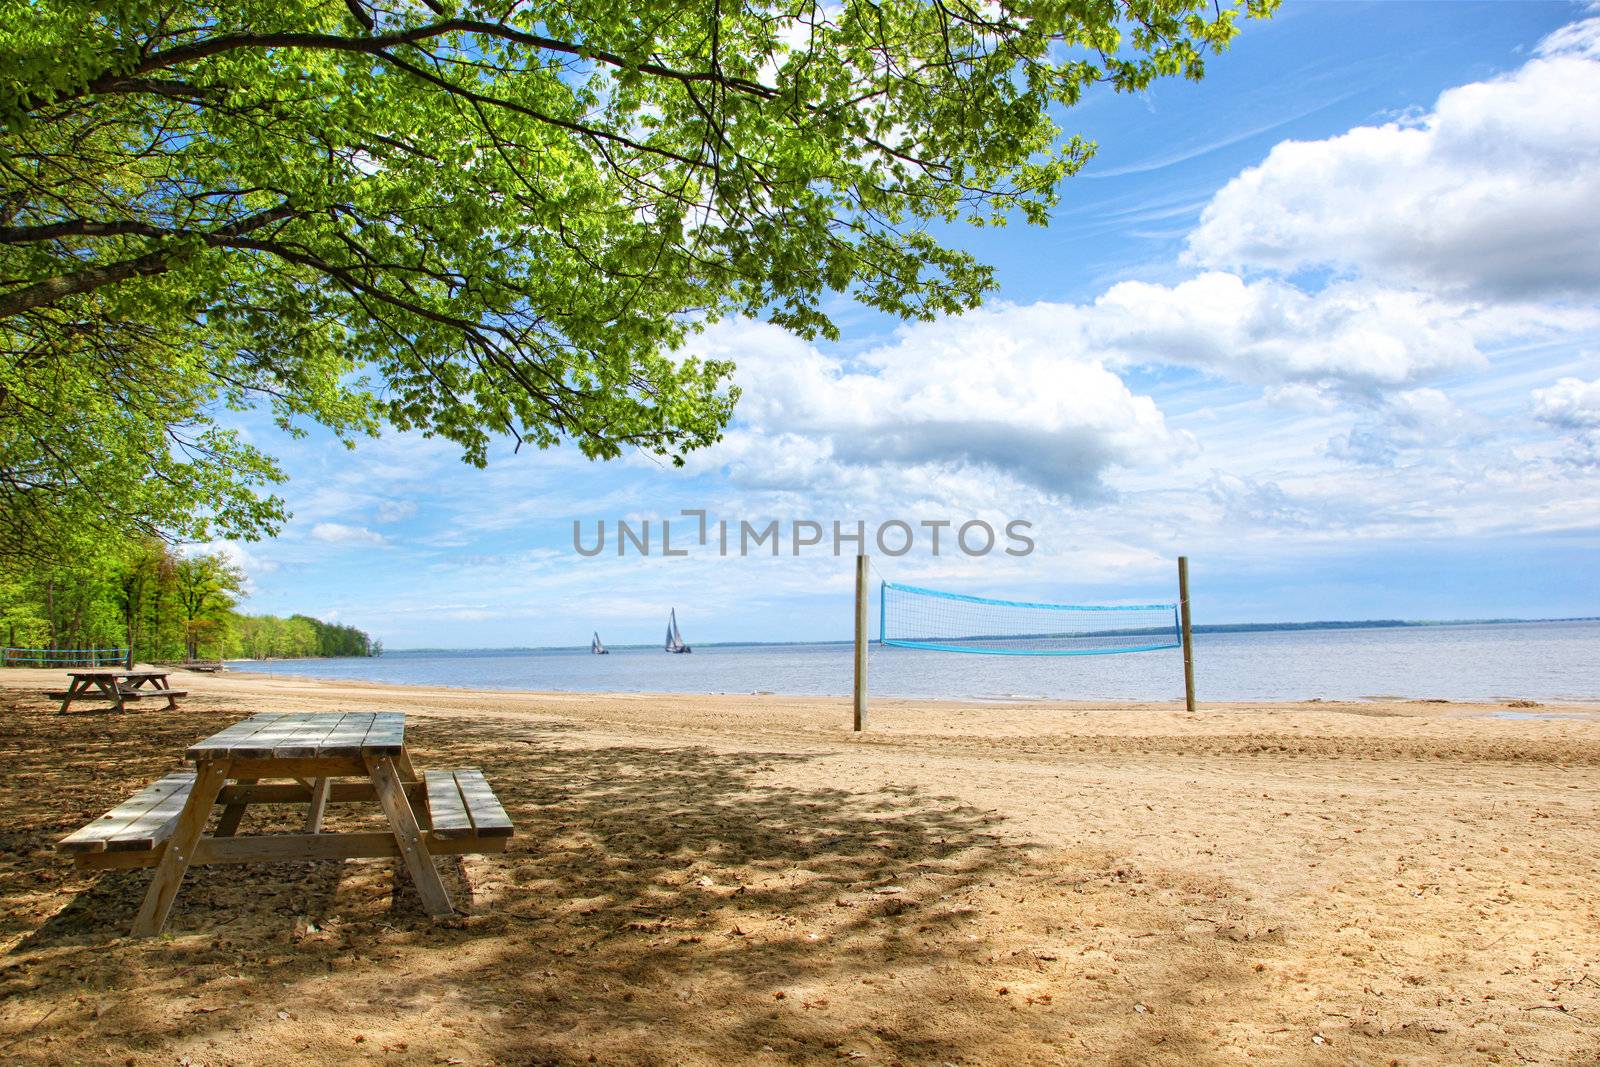 Picnic tables at the beach  by Sandralise